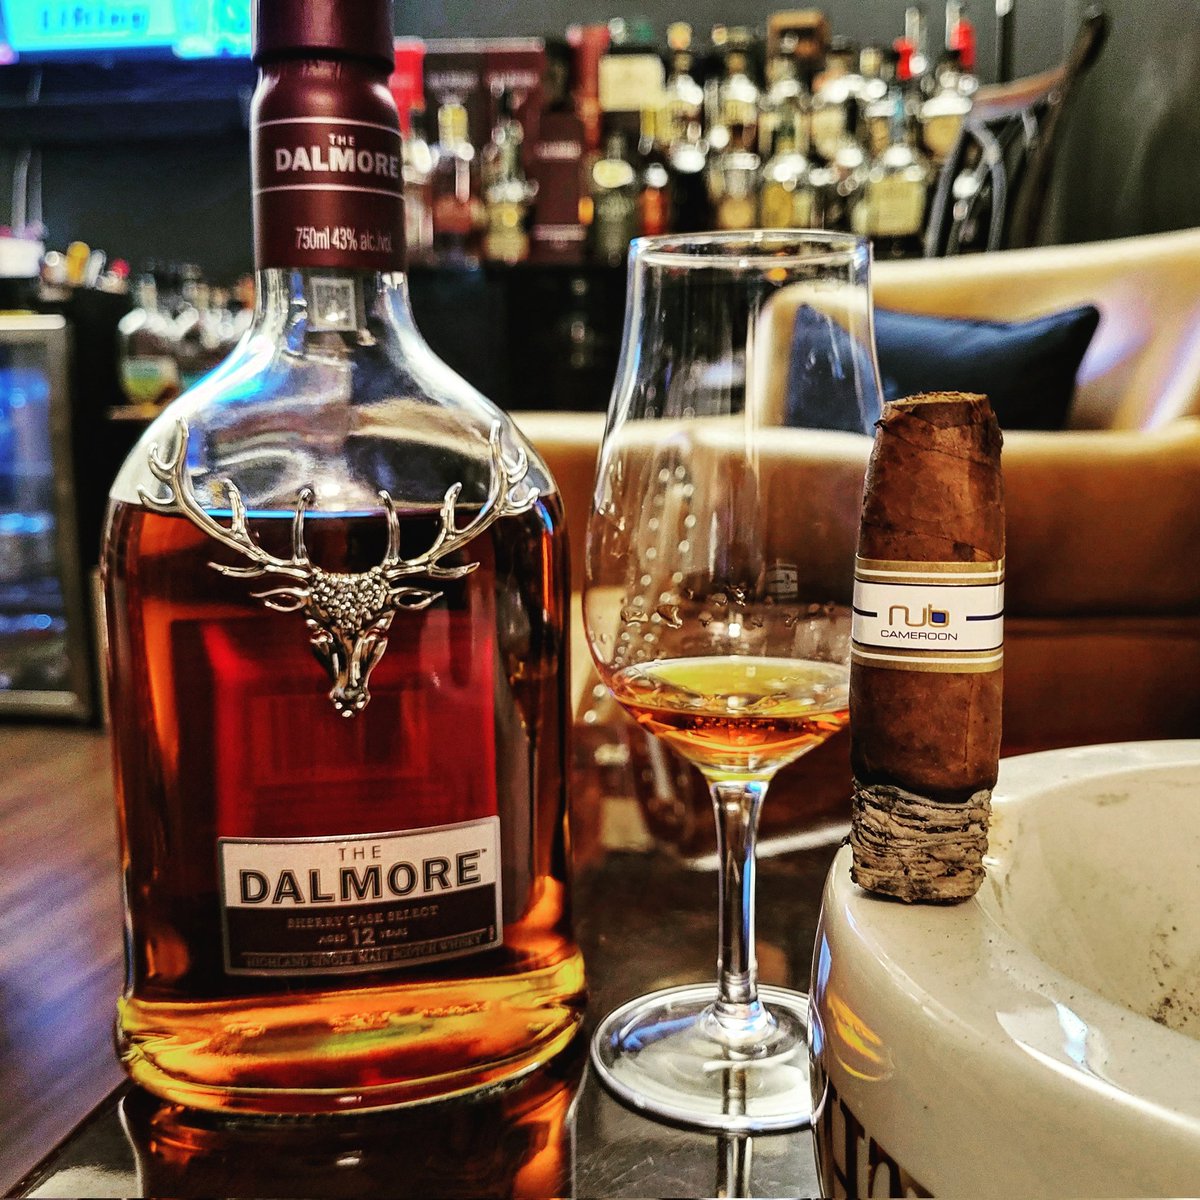 Round 2 brings TheDalmore Sherry cask select paired with the always reliable Nub Cameroon